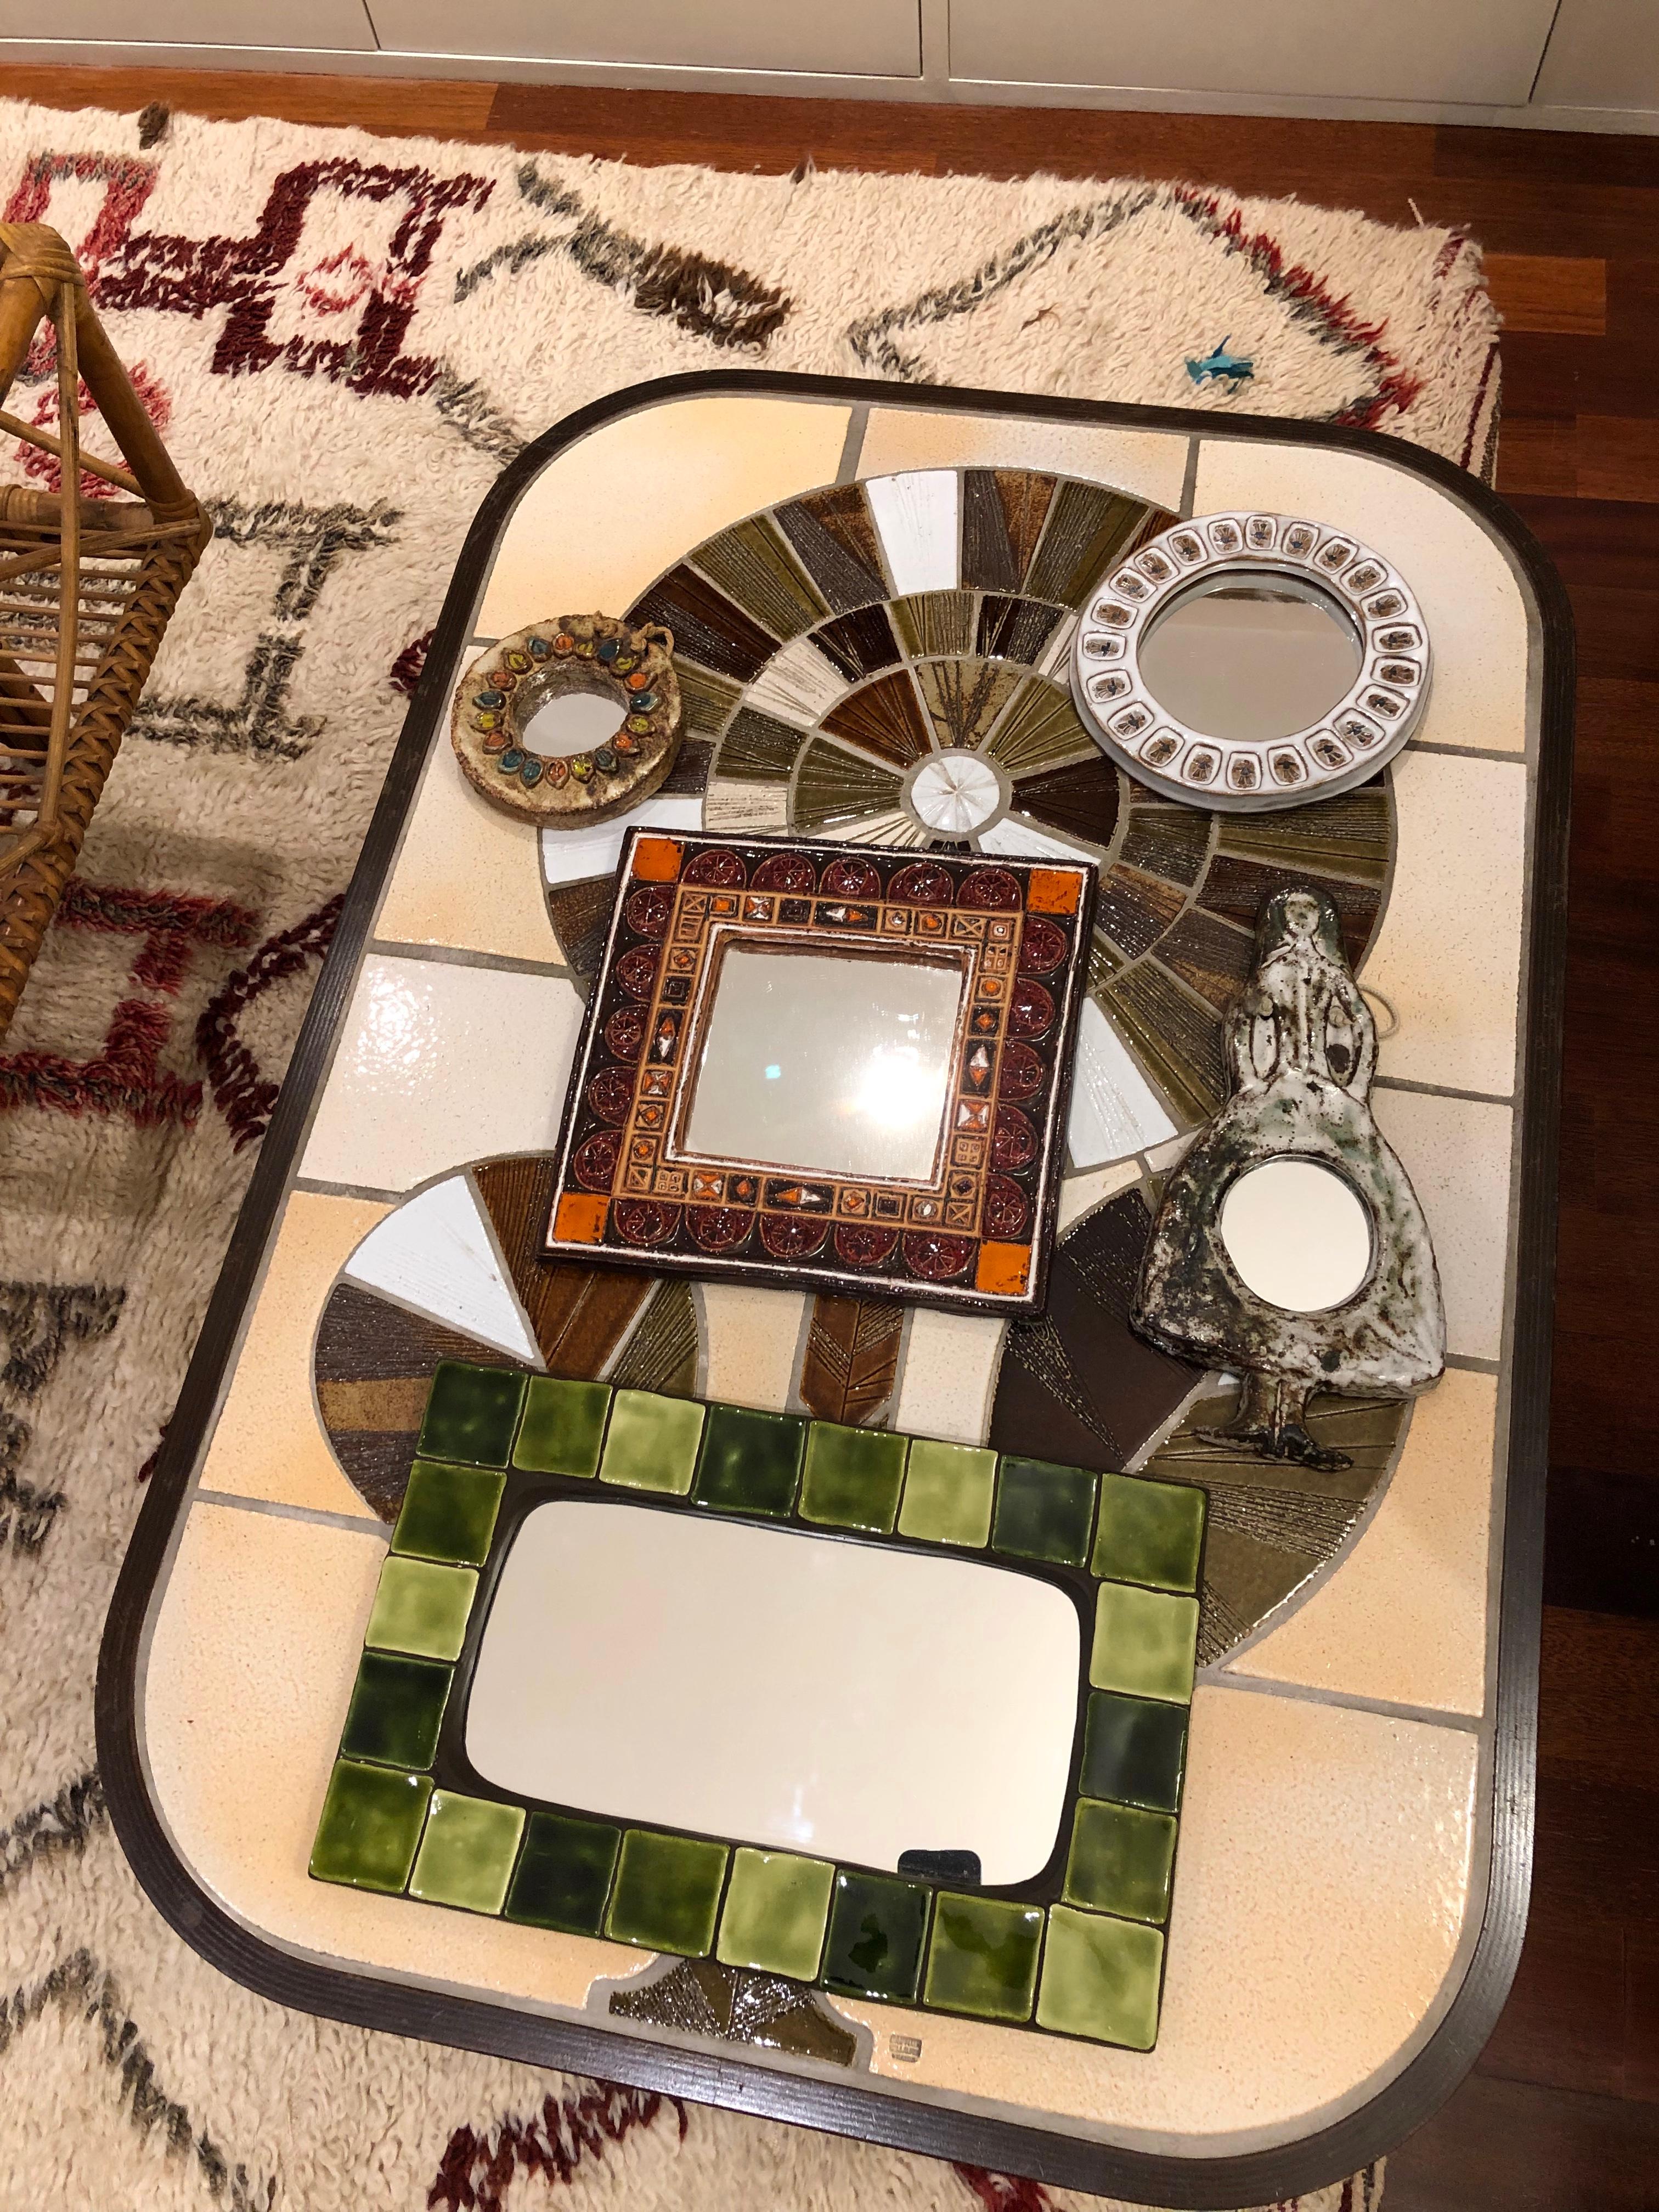 Ceramic tiled French mirror, circa 1970s. Glazed ceramic tiles of alternating dark and light greens frame this rectangular mirror on a ceramic base. A characterful example of its era, this mirror will be a real conversation piece for your home or